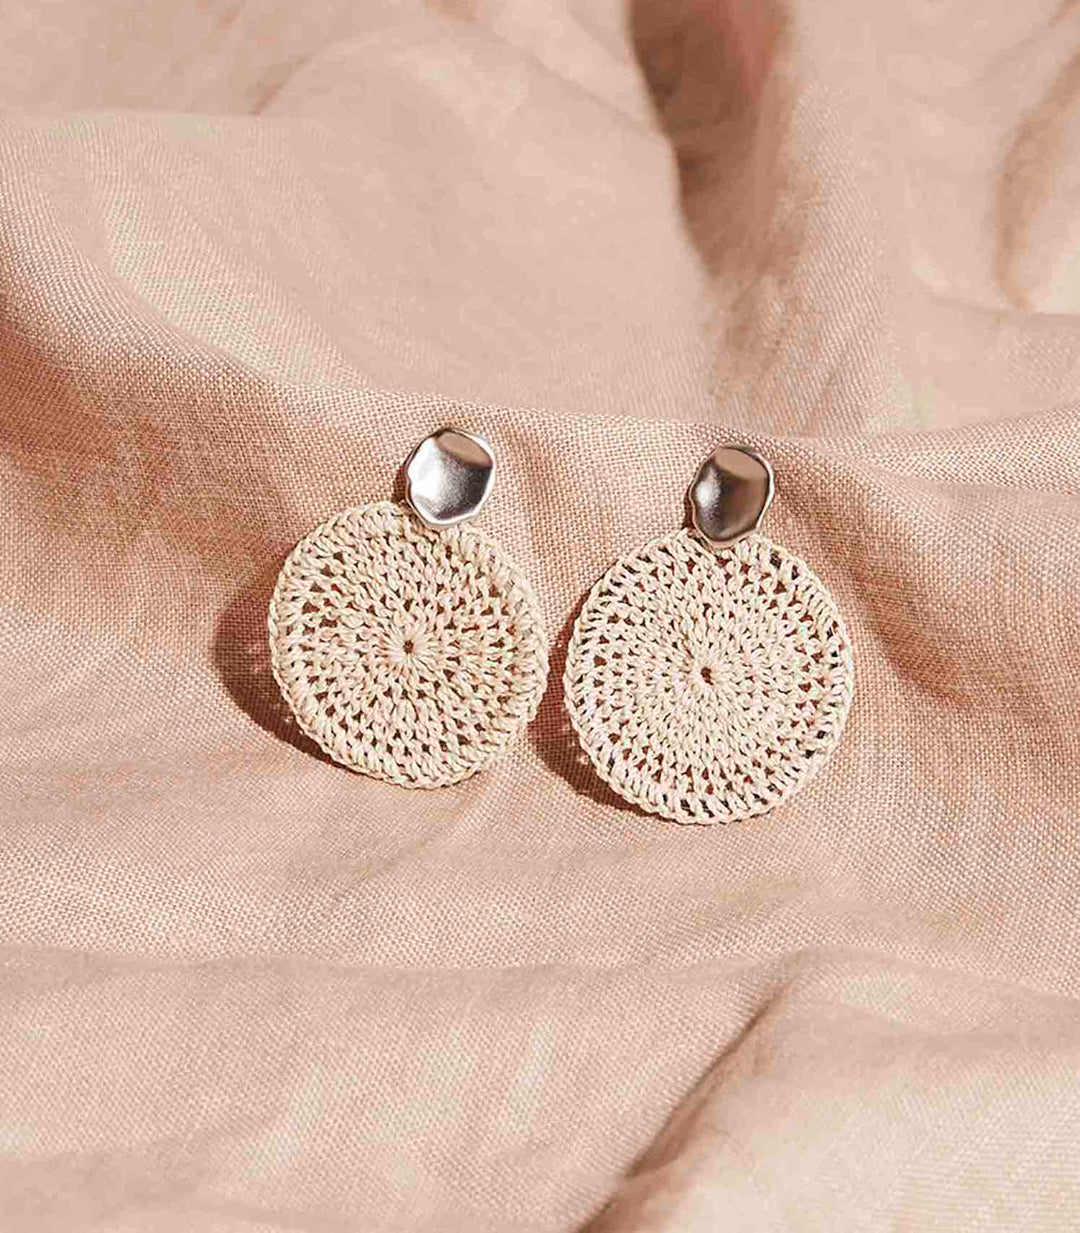 Silver earrings with handwoven natural fibre discs on a white background.